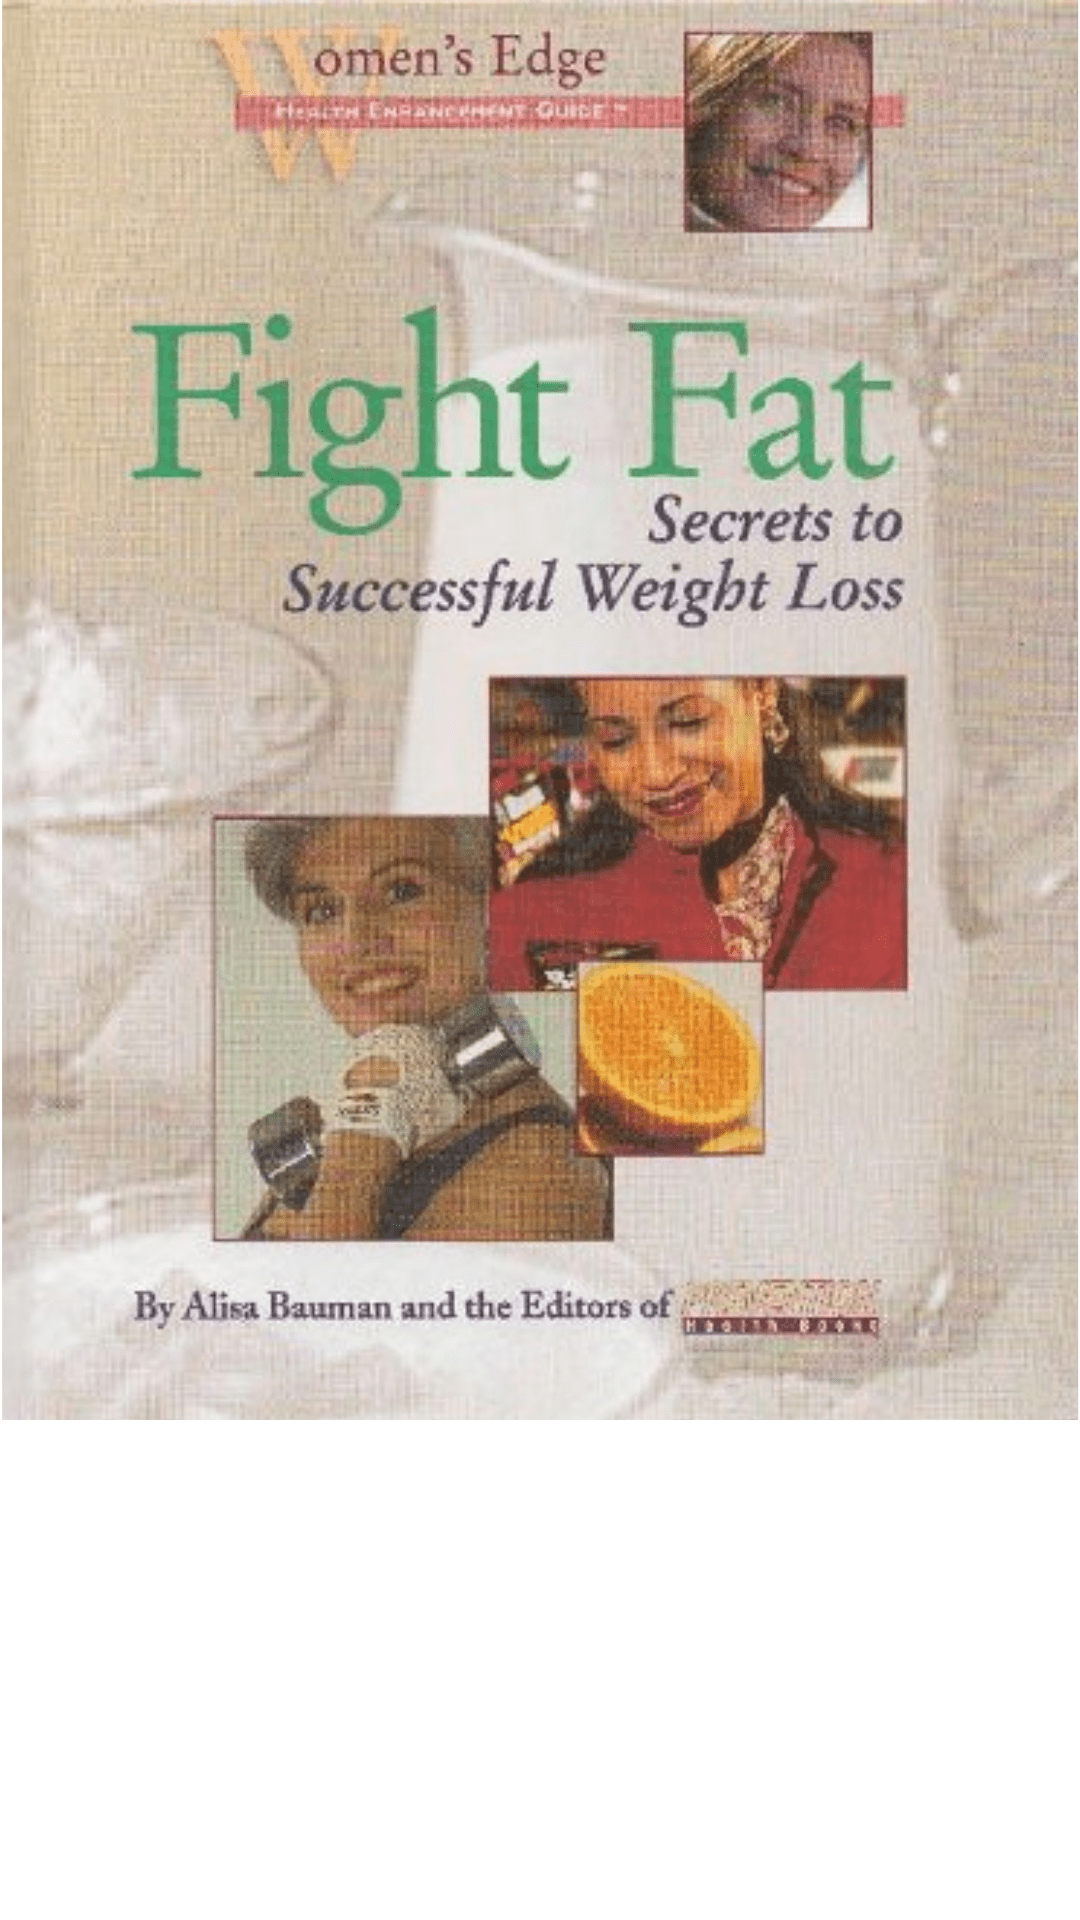 Fight Fat: Secrets to Successful Weight Loss (Women's Edge Health Enhancement Guides)